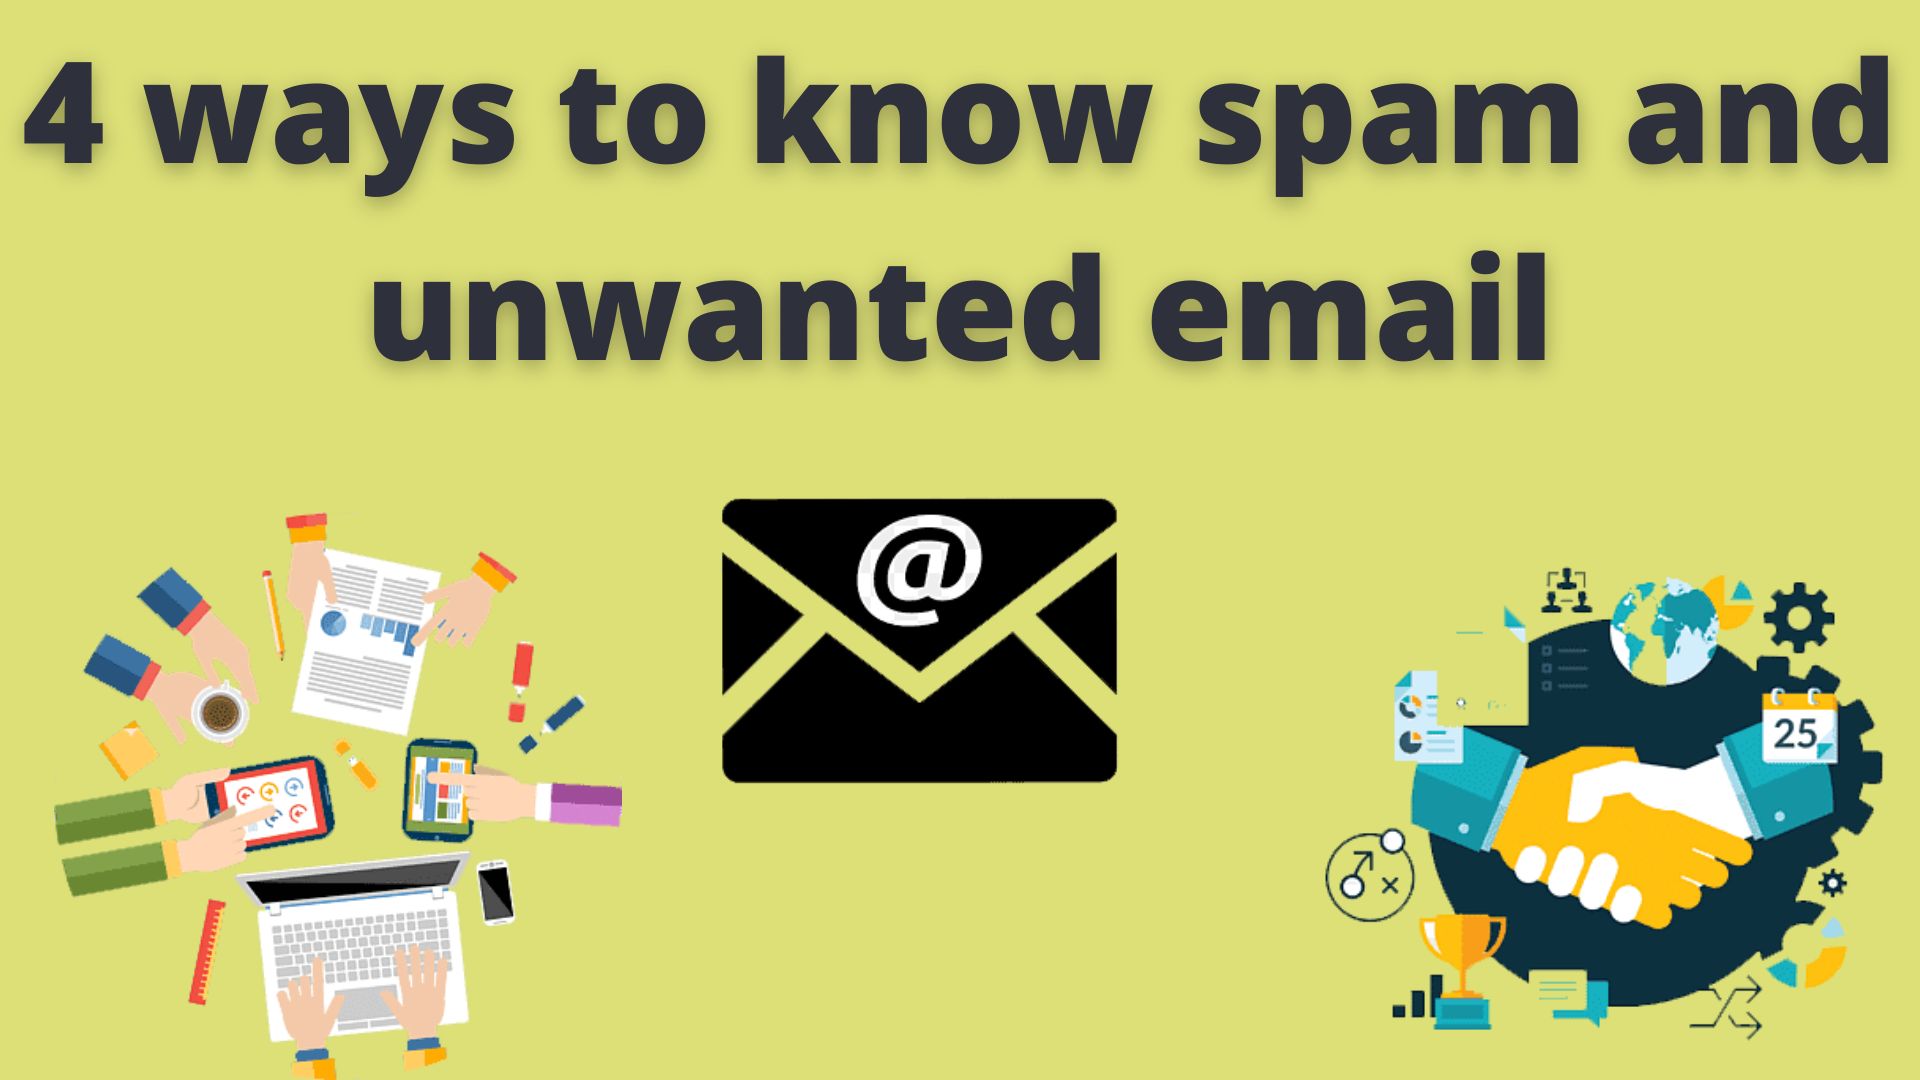 4 ways to know spam and unwanted email